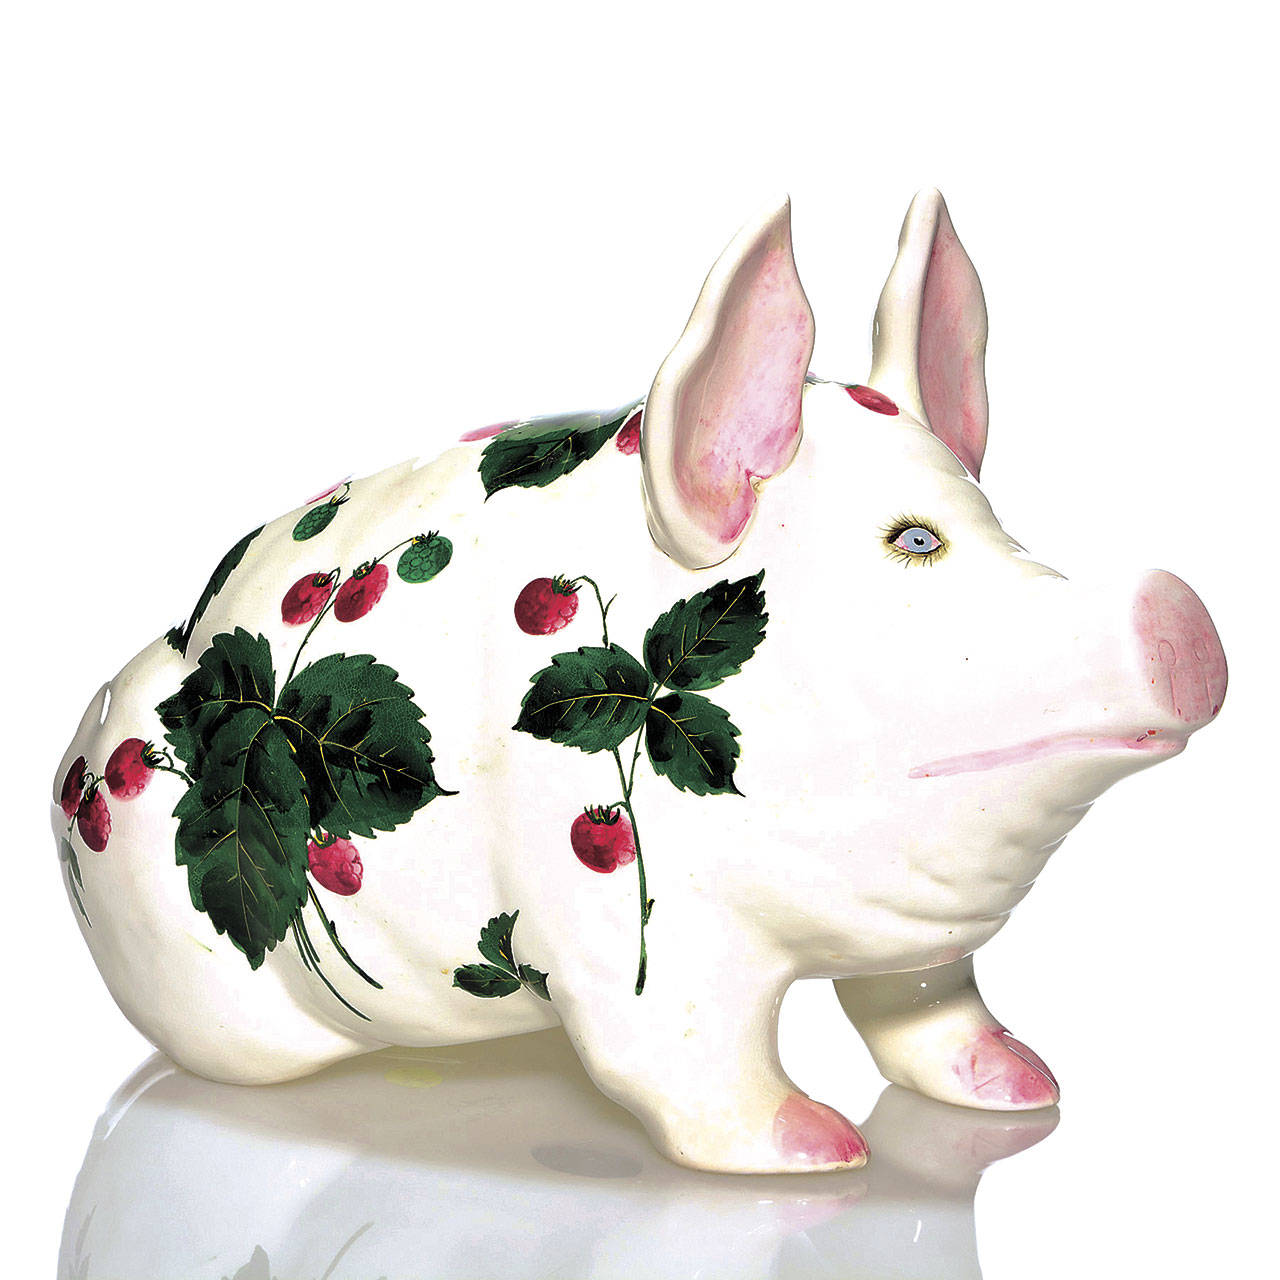 This Wemyss Ware pig was decorated by Joseph Nekola for Jan Plichta. The pre-1952 pig sold for $472. (Cowles Syndicate Inc.)